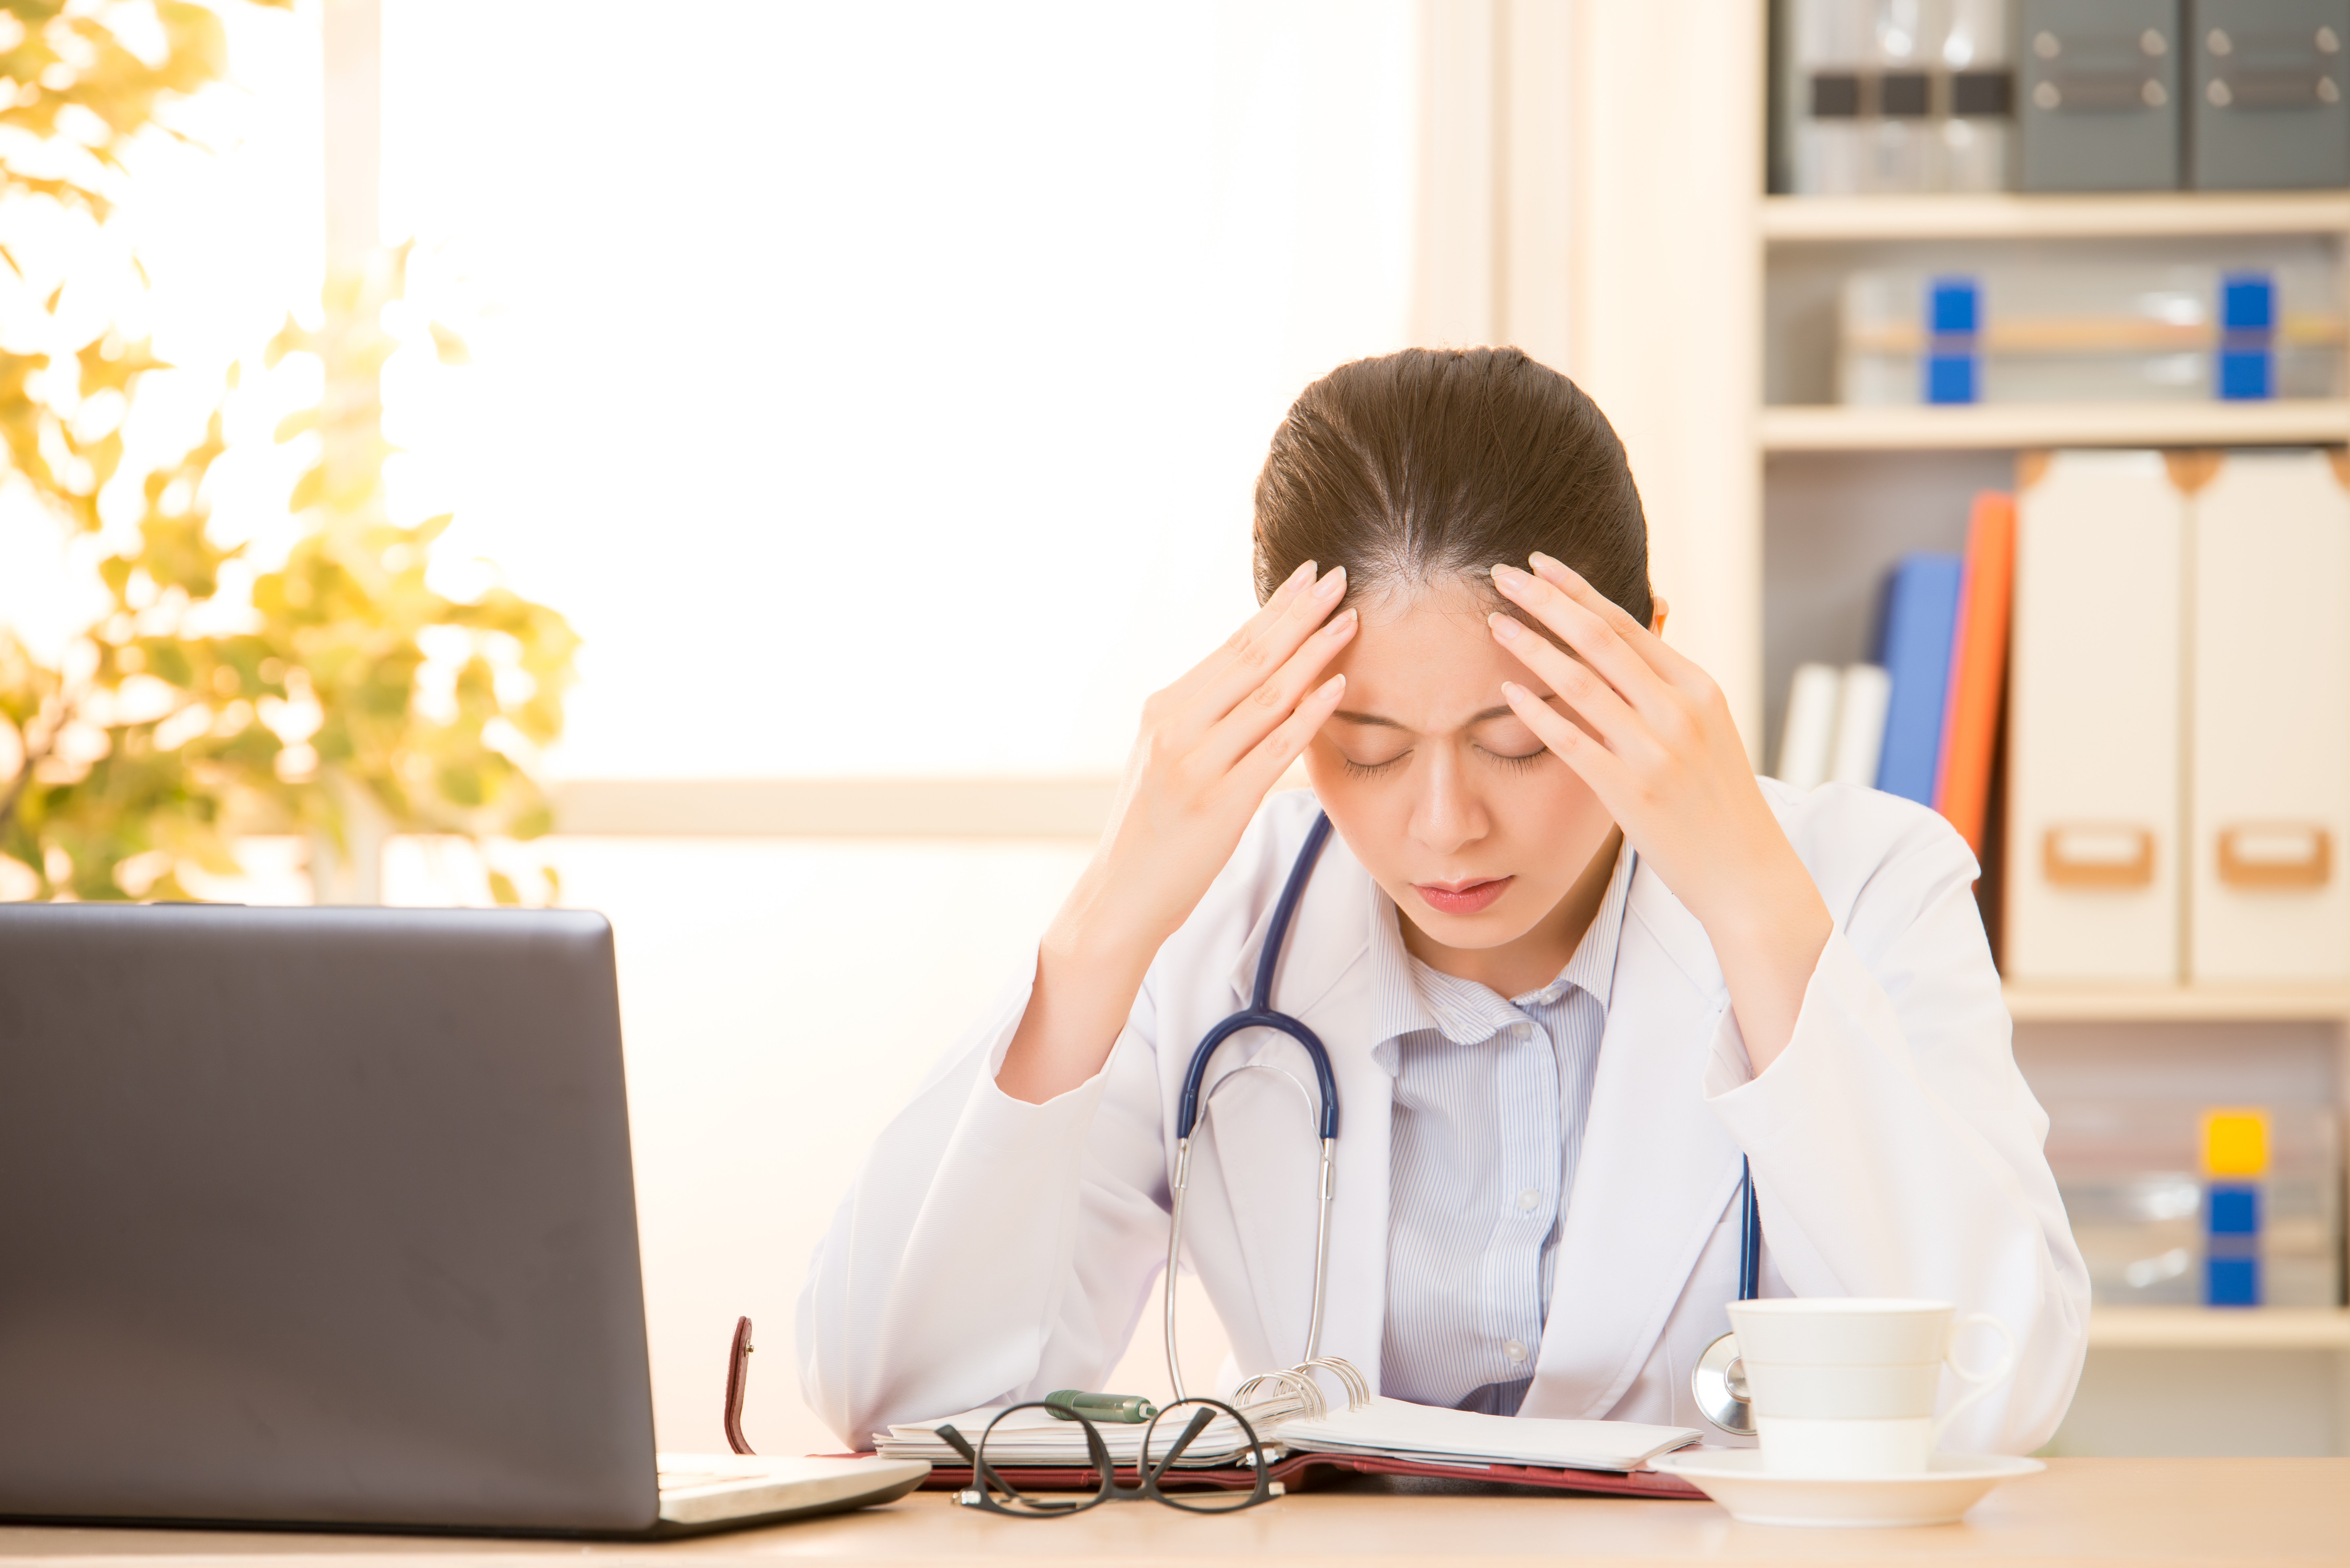 Flawed Distribution Models in Healthcare Driving Physician Burnout